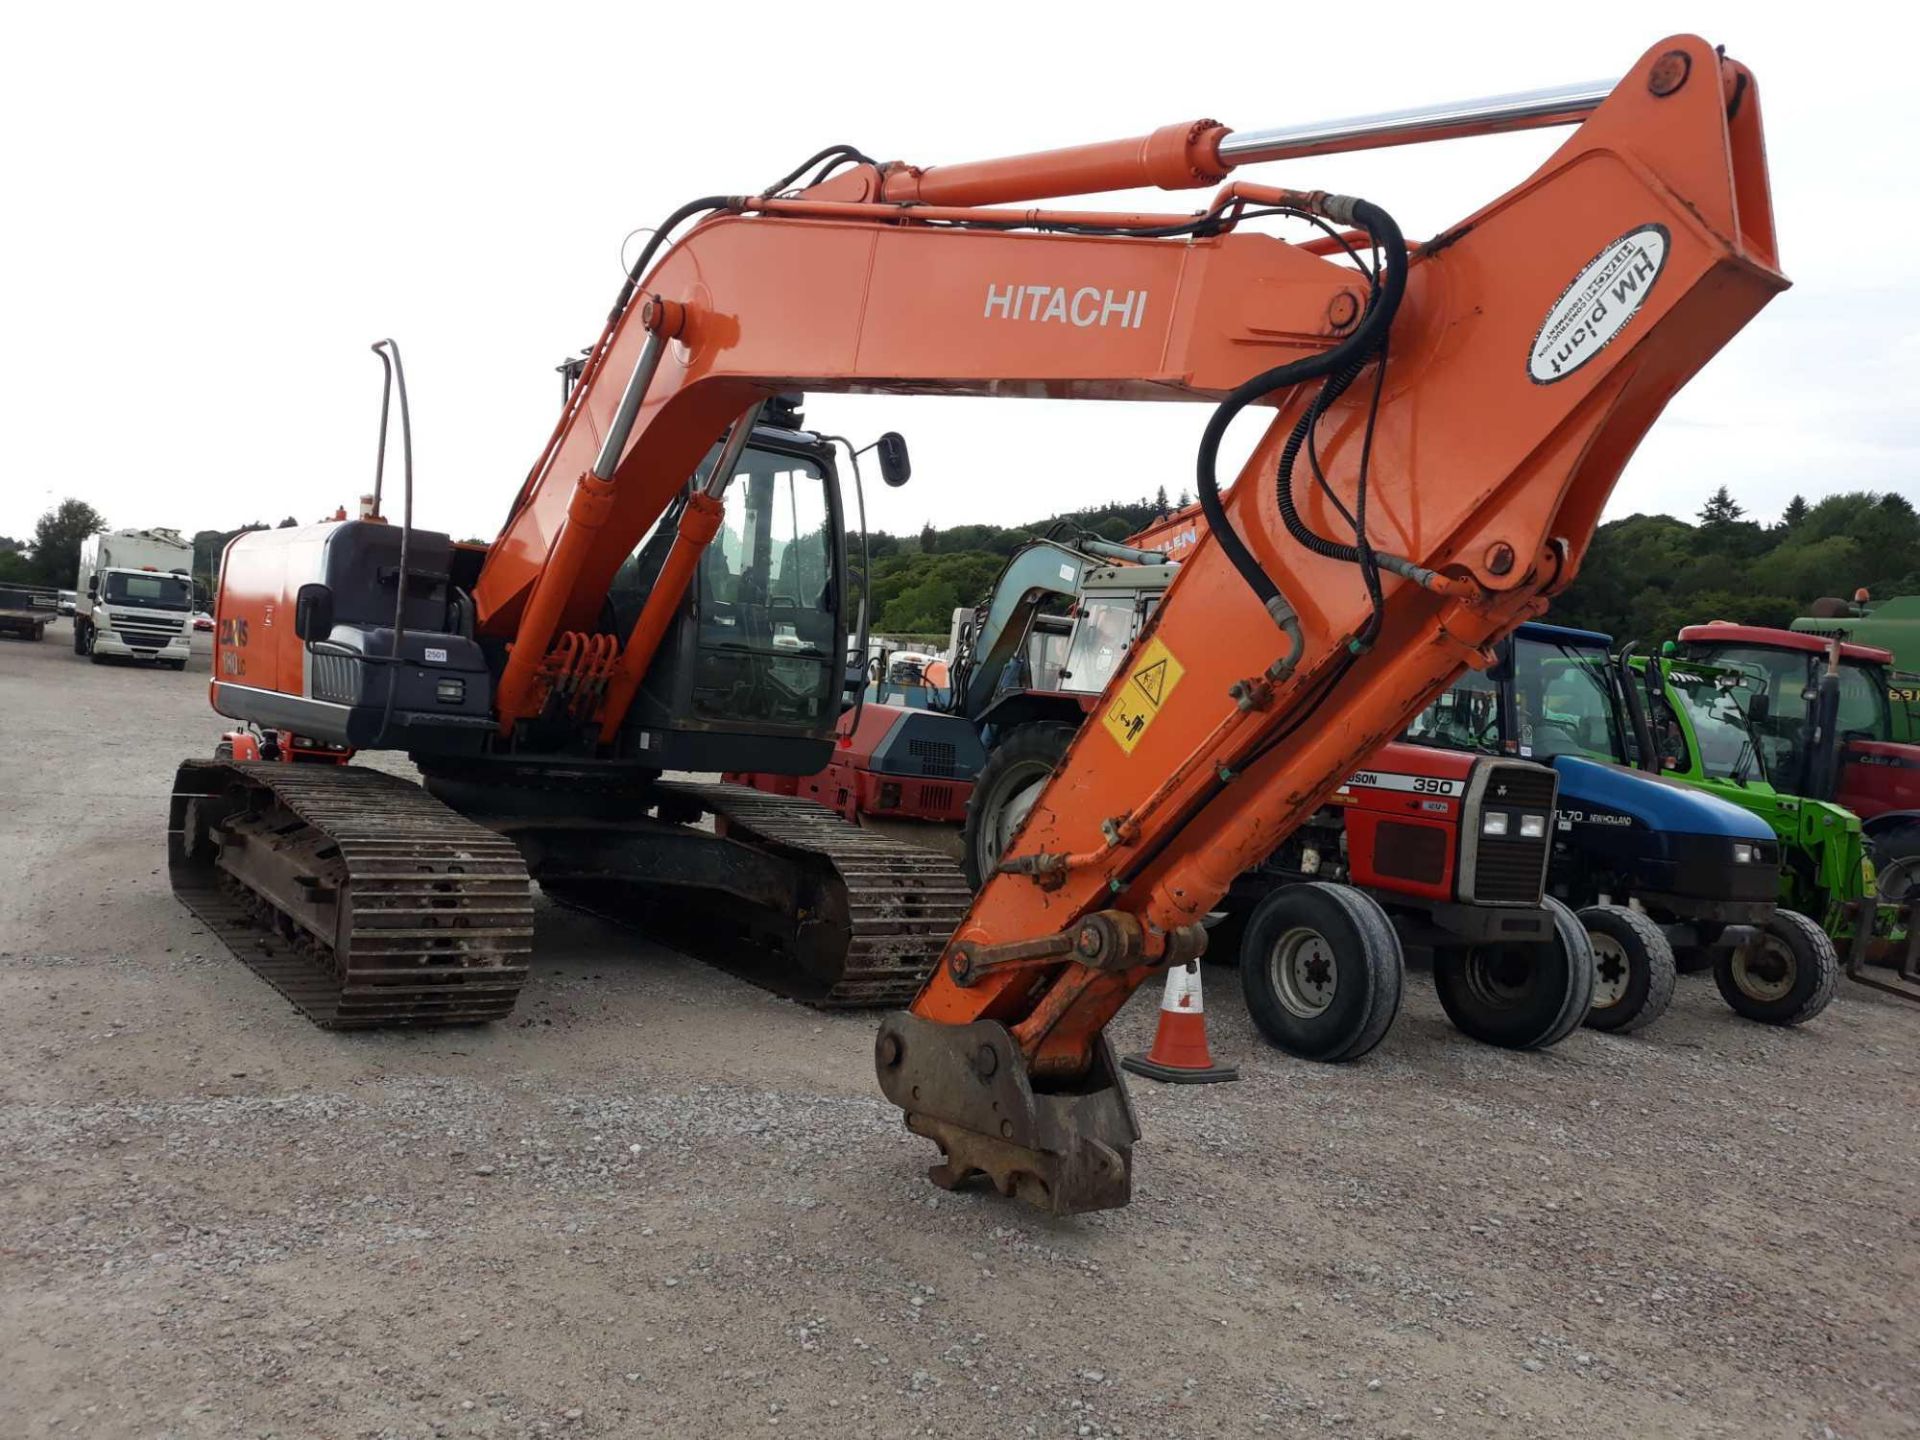 Hitachi ZX180LC-3 Excavator, Year 2008, 8140 hours displayed - not warranted, Key in PC, + VAT - Image 3 of 6